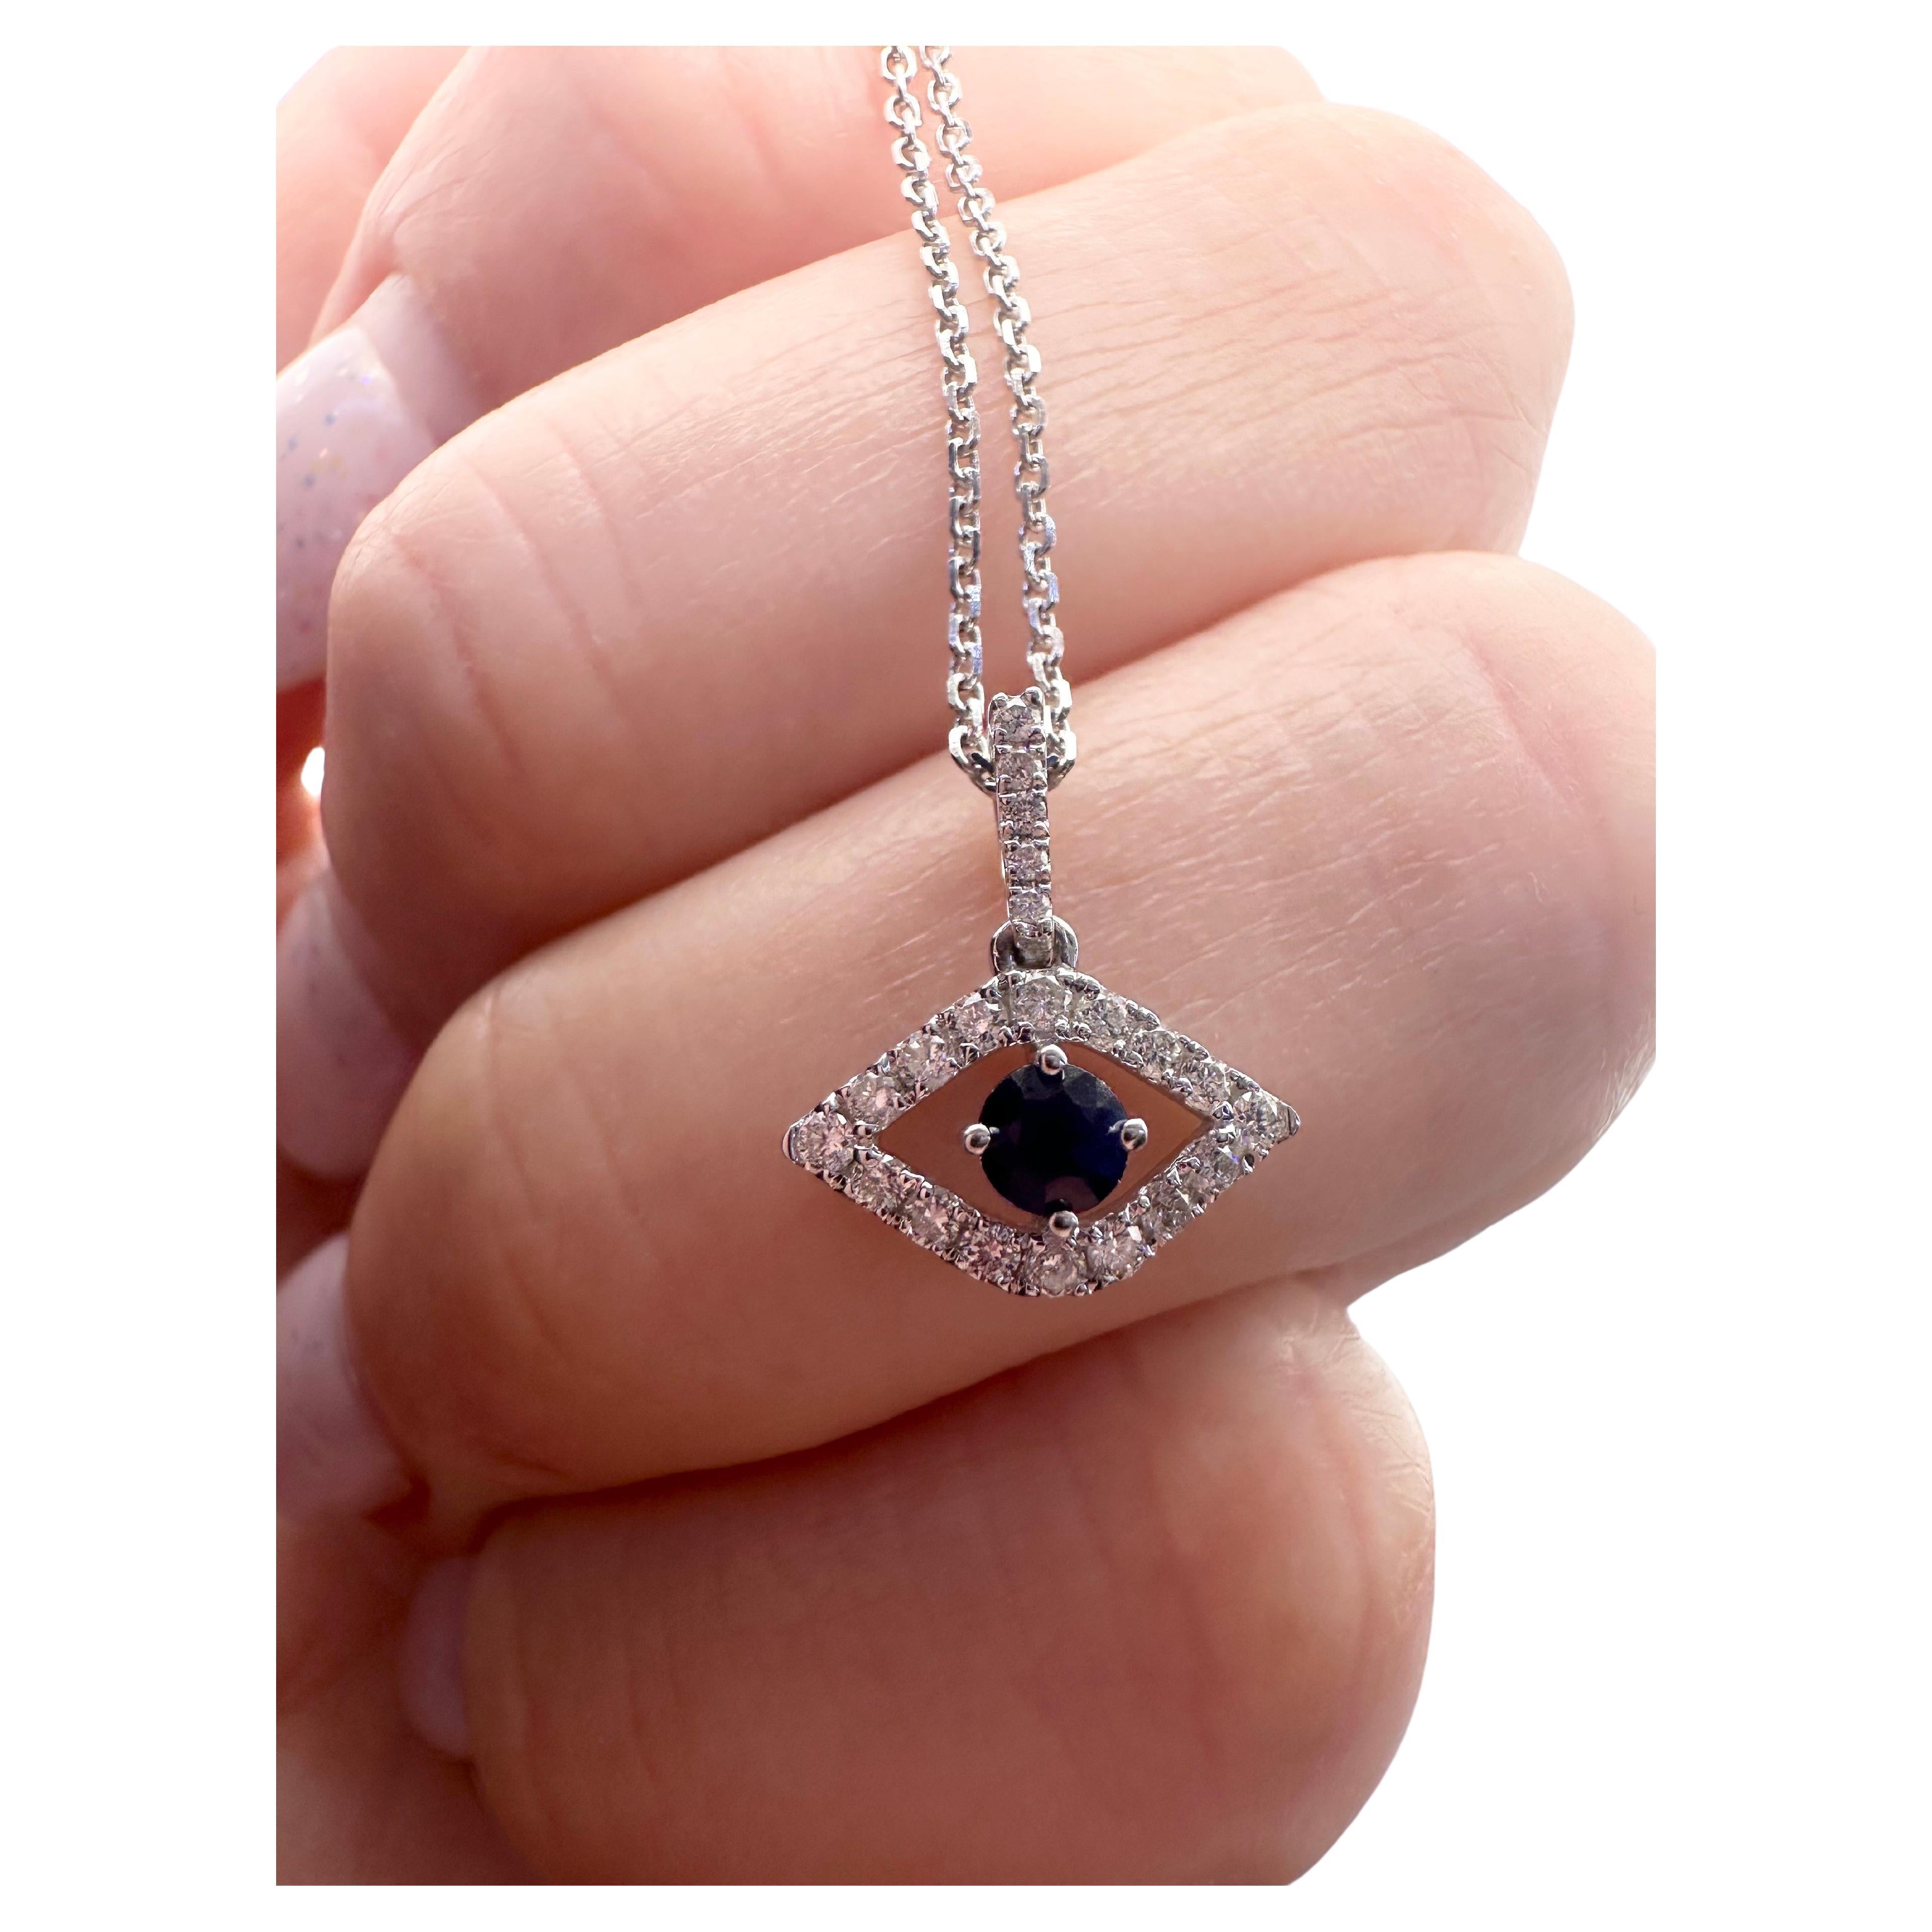 Simple and elegant pendant necklace made with natural sapphires and diamonds in 14Kt white gold, certificate of authenticity comes with the purchase! Chain is 18